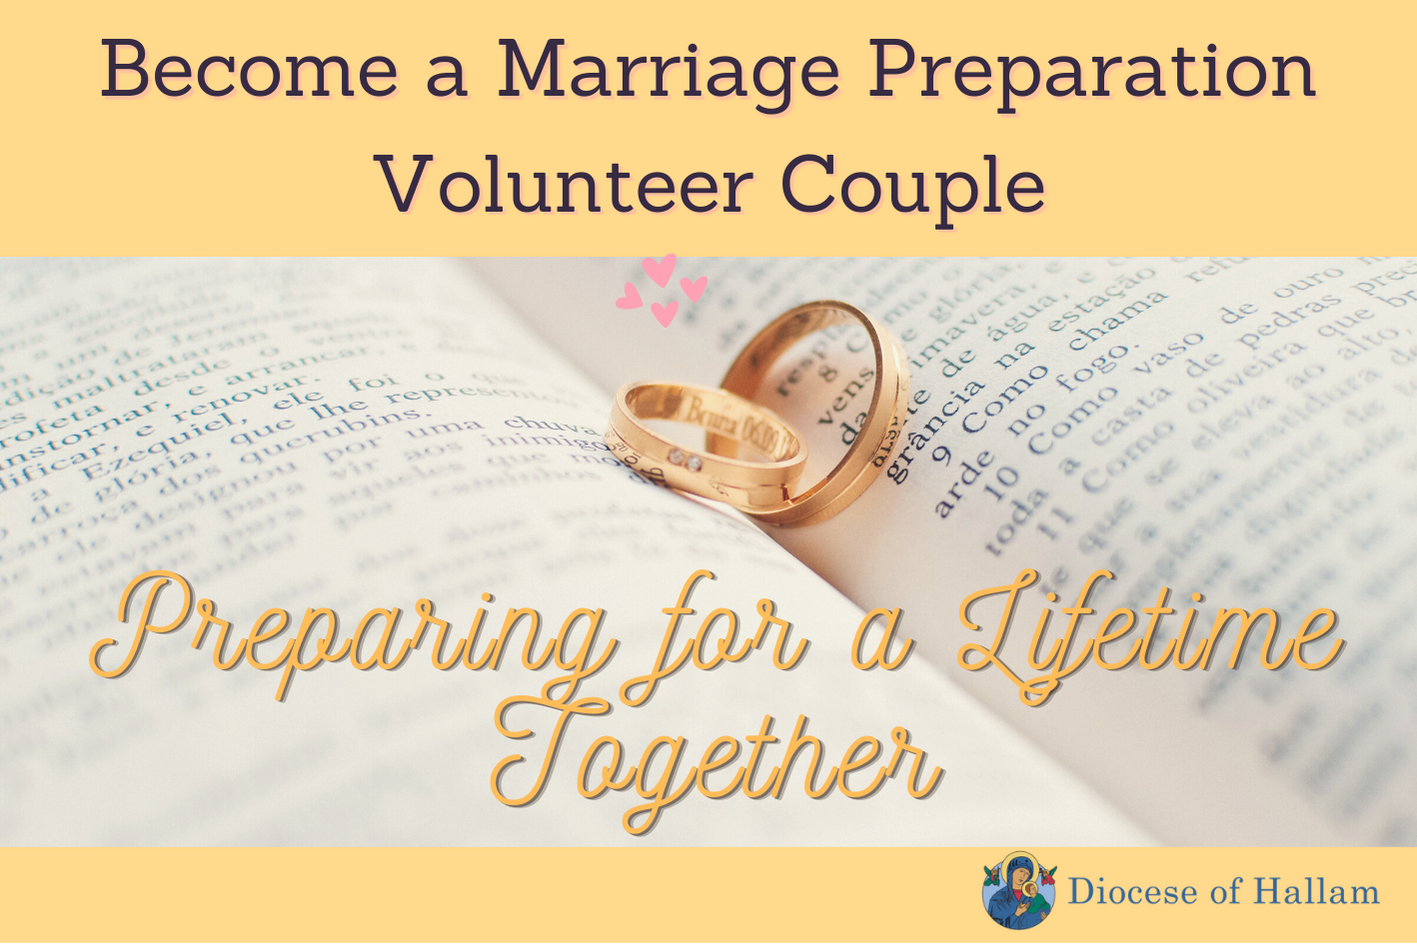 Become a Marriage Preparation Volunteer Couple.